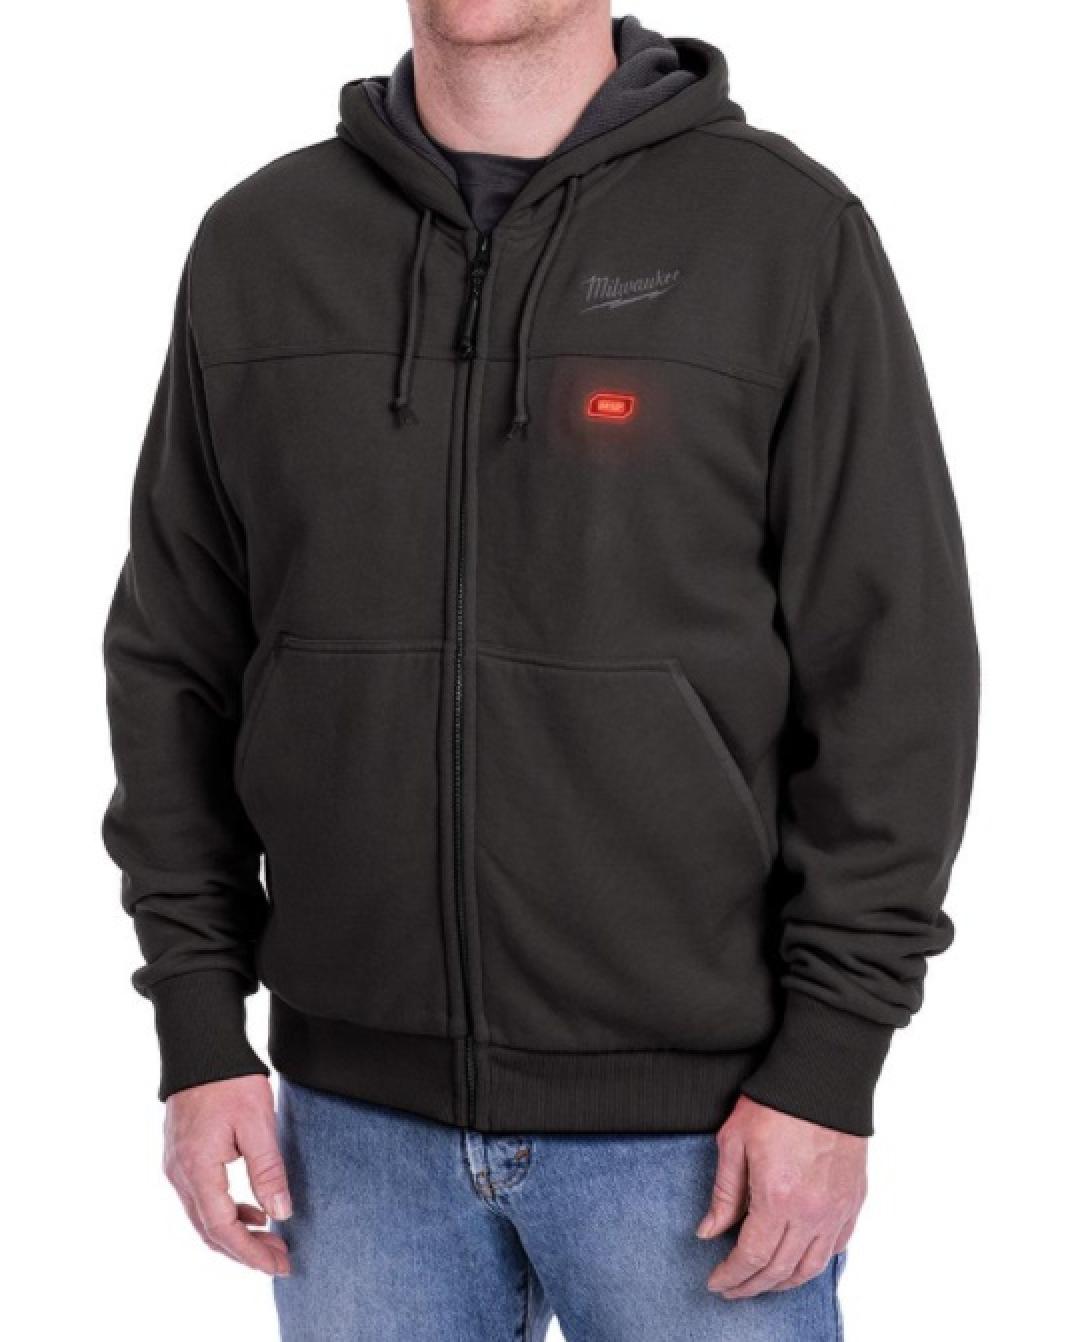 Milwaukee M12 Black Heated Hoodie Person Wearing Front